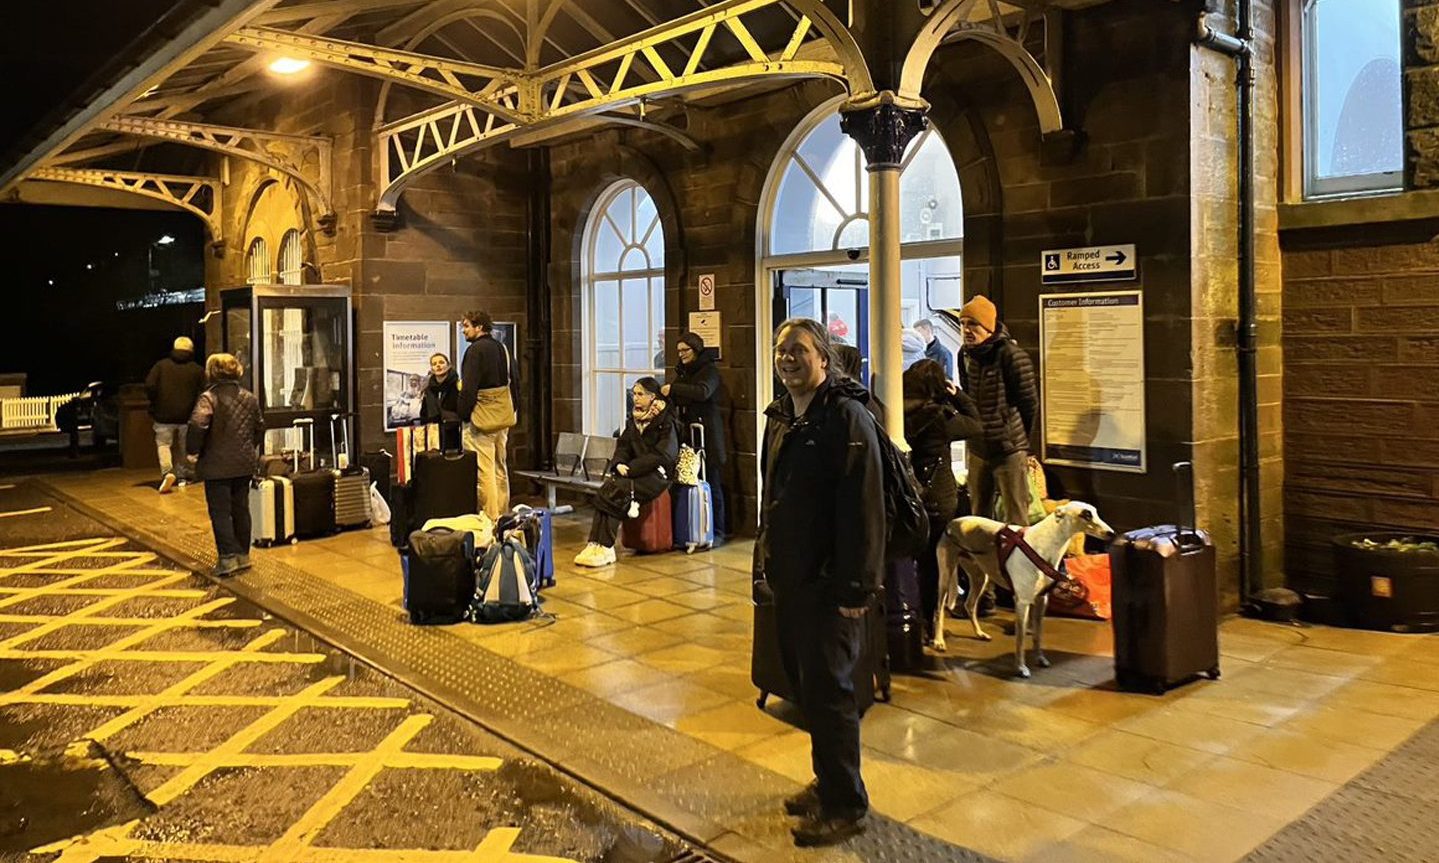 Niall Atkinson, 32, waits outside Stonehaven station with other stranded passengers after a cancellation due to Storm Gerrit.